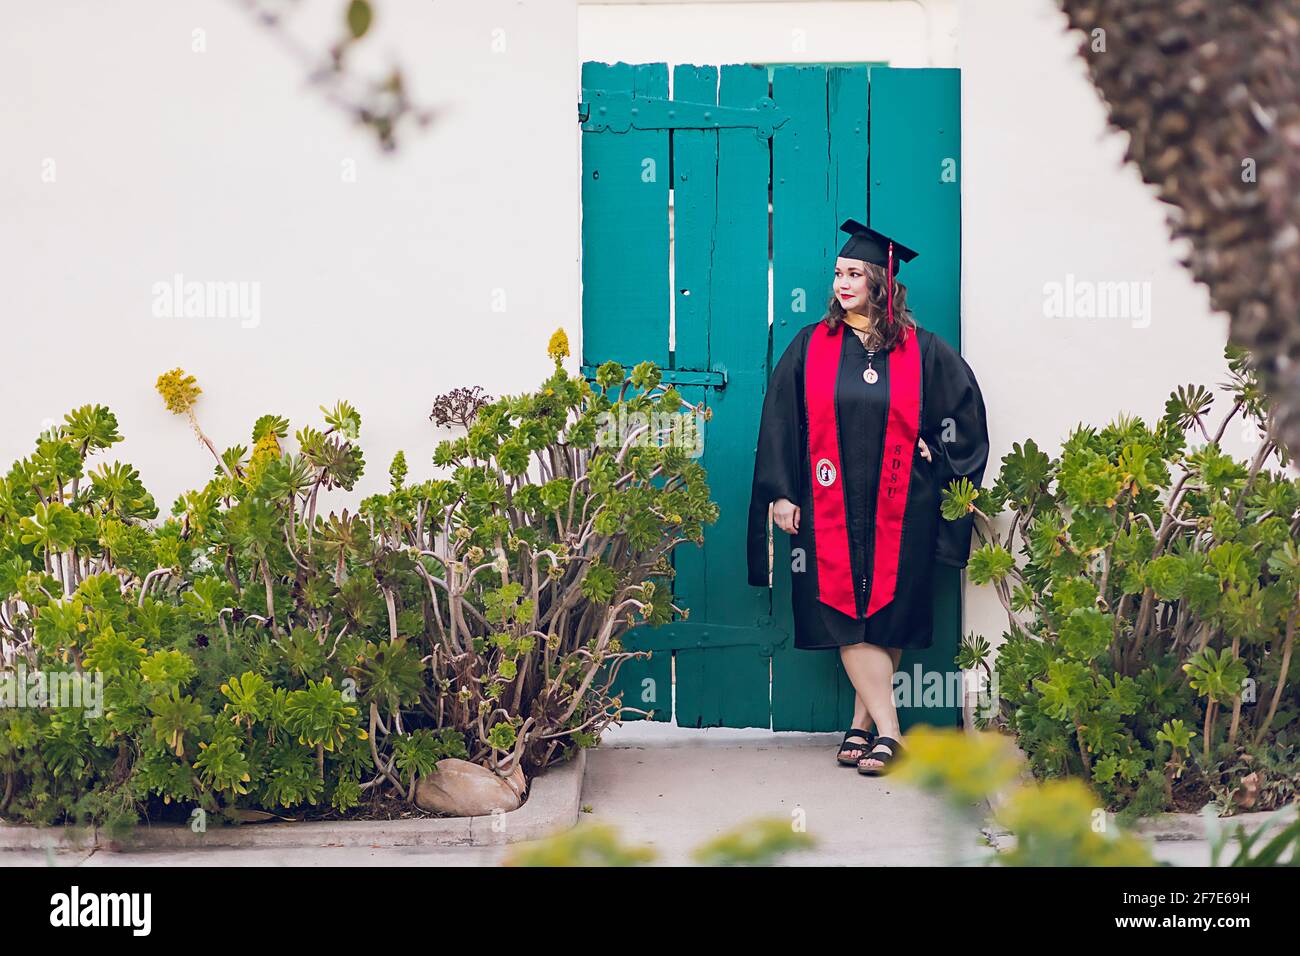 Woman wearing a graduation gown/cap standing in front of blue gate. Stock Photo